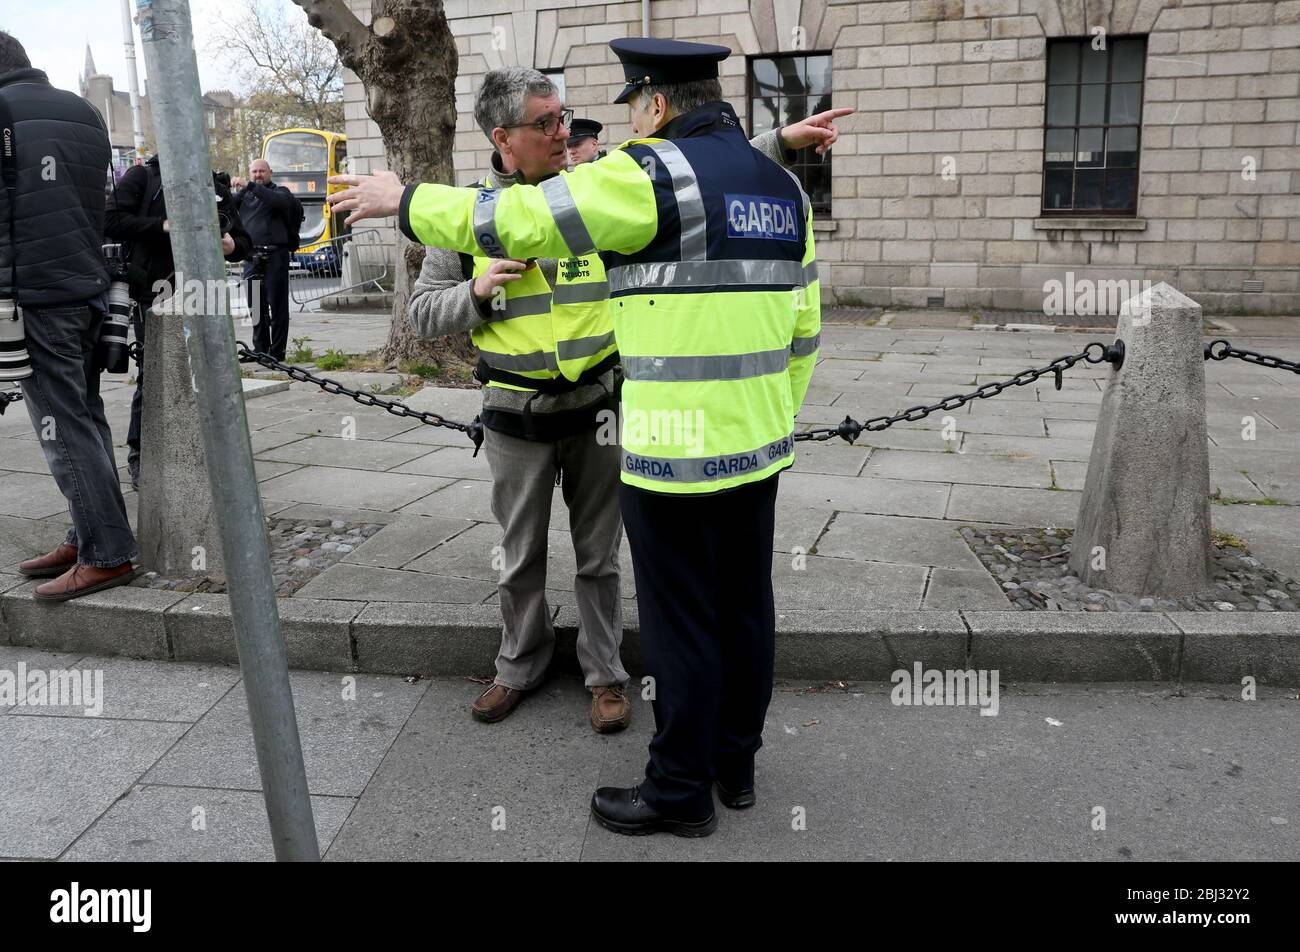 A member of An Garda speaks with a supporter of Gemma O'Doherty and John Waters who have launched a legal challenge against the State over emergency laws and restrictions introduced to stop the spread of Covid-19 outside the High Court in Dublin. Stock Photo